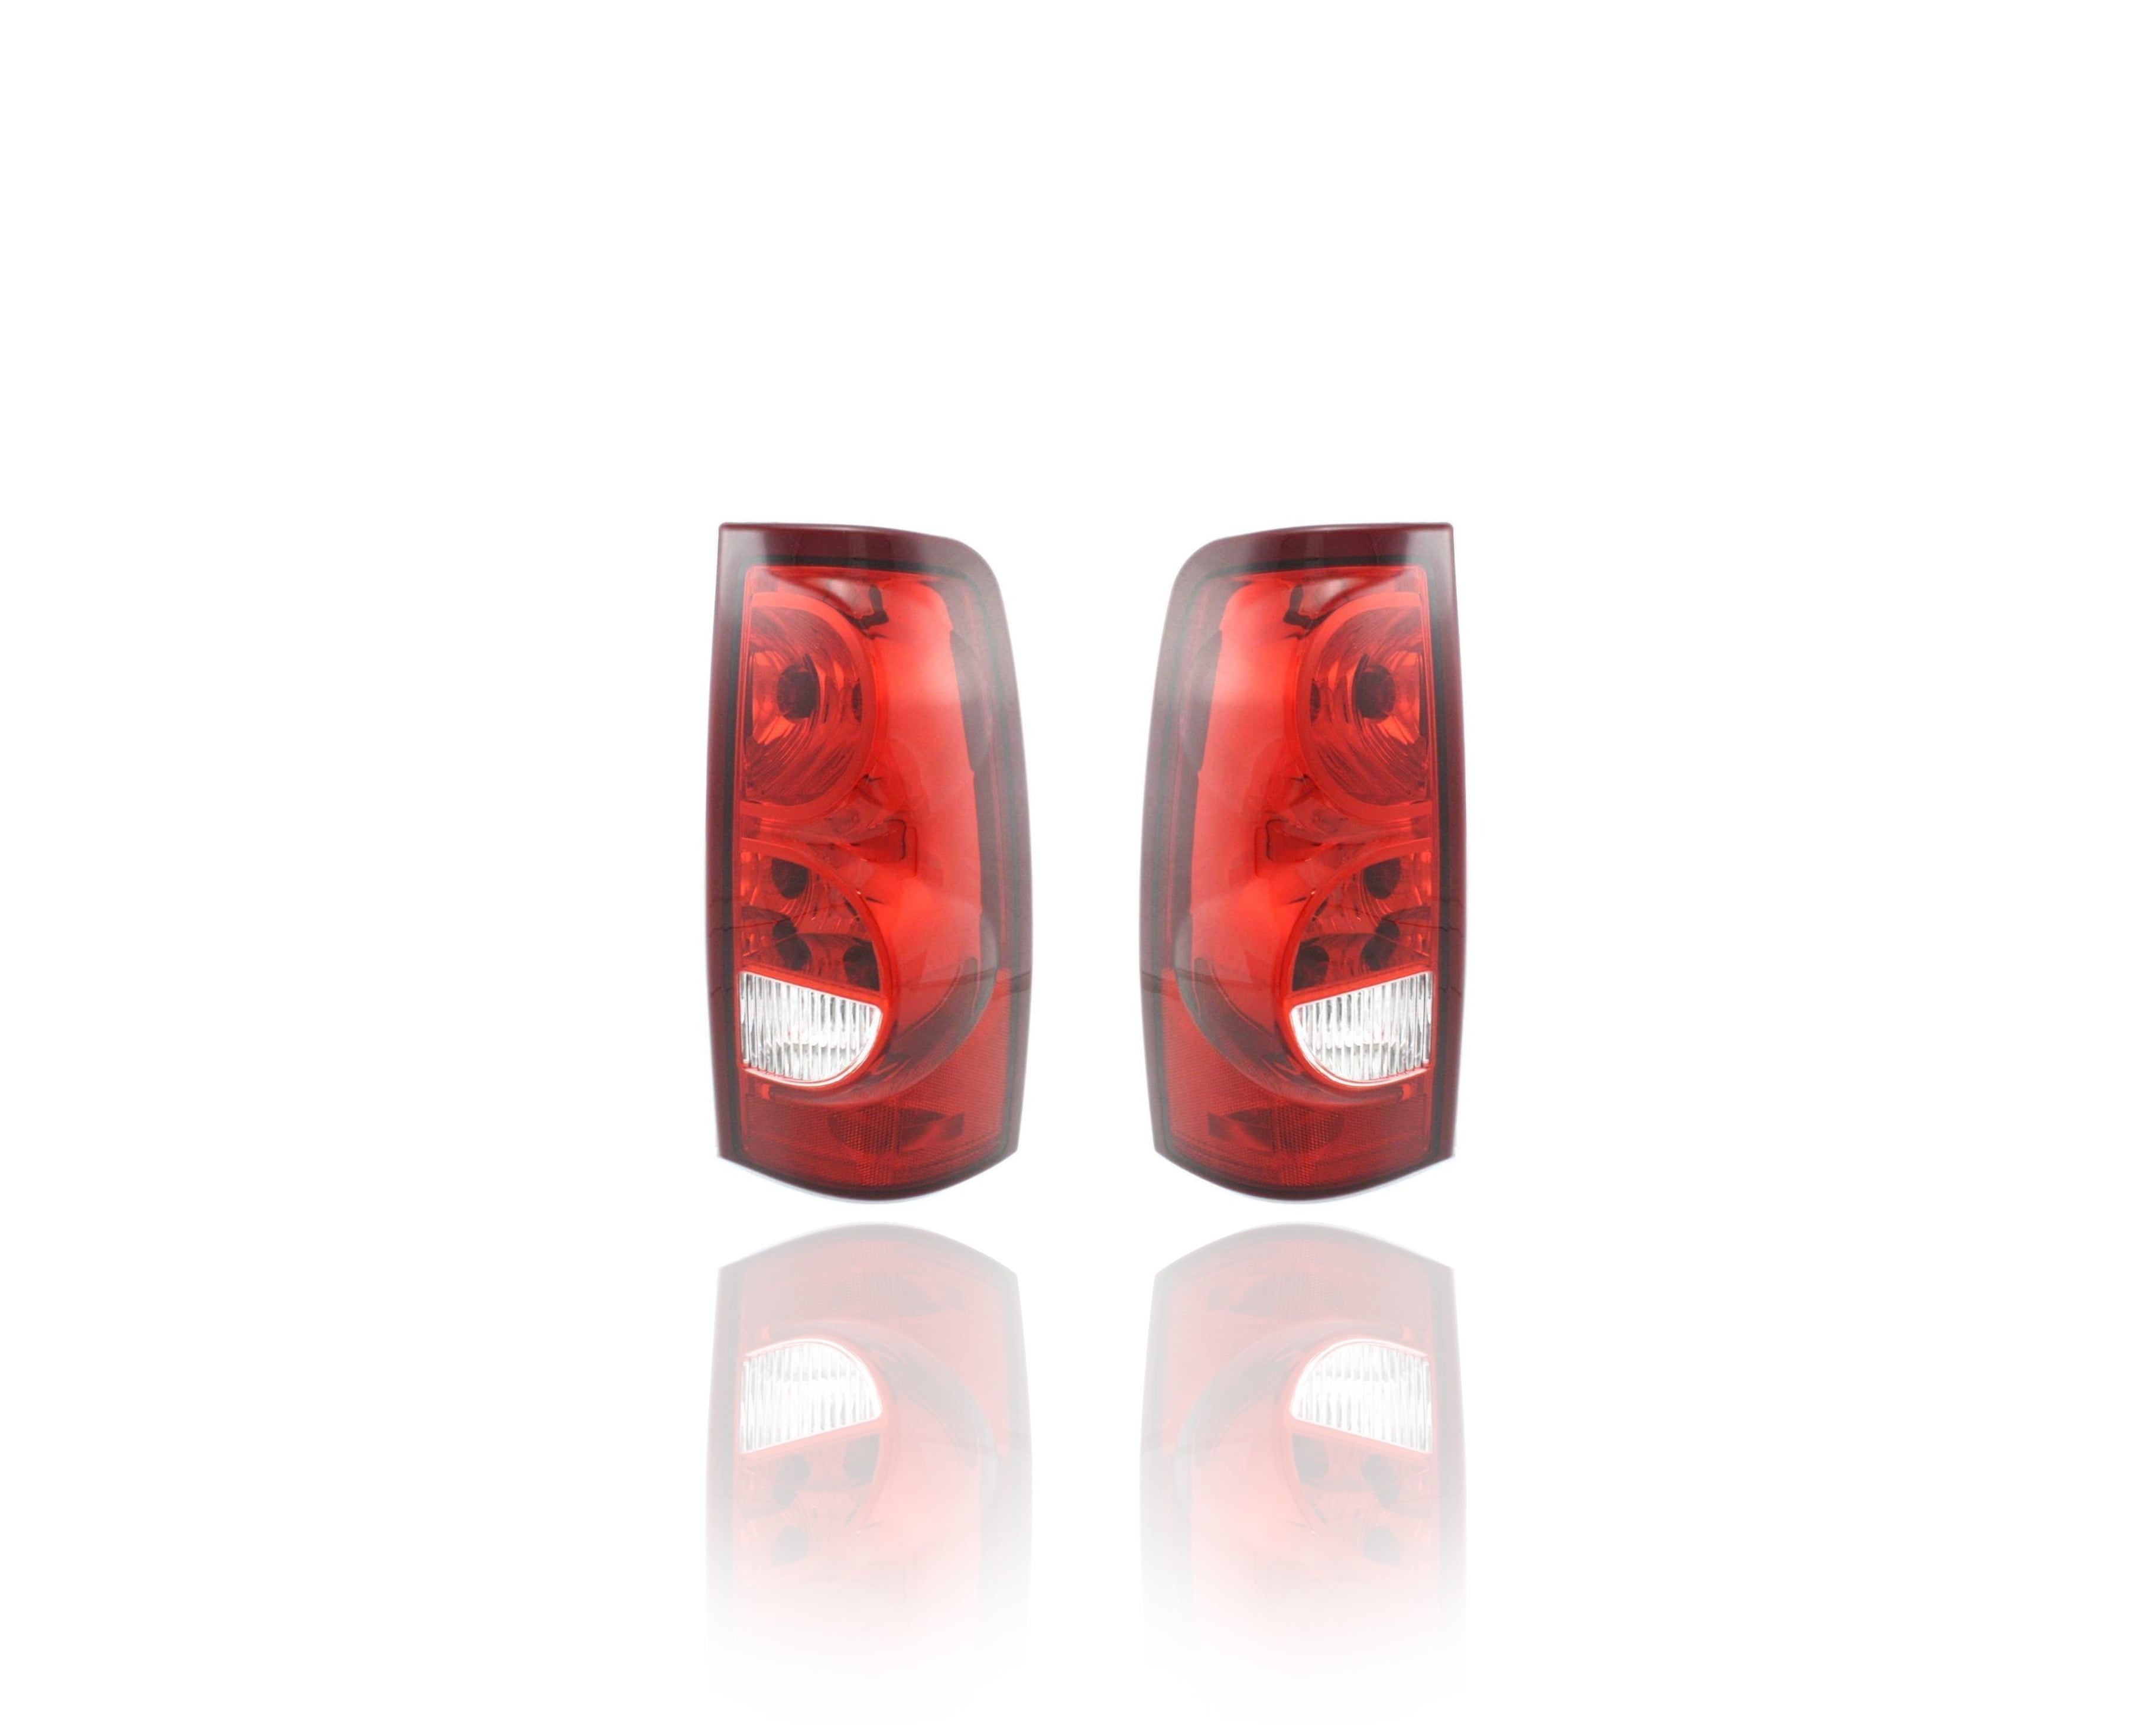 Driver and Passenger Taillights Tail Lamps Replacement for Chevrolet Pickup Truck 19169002 19169003 